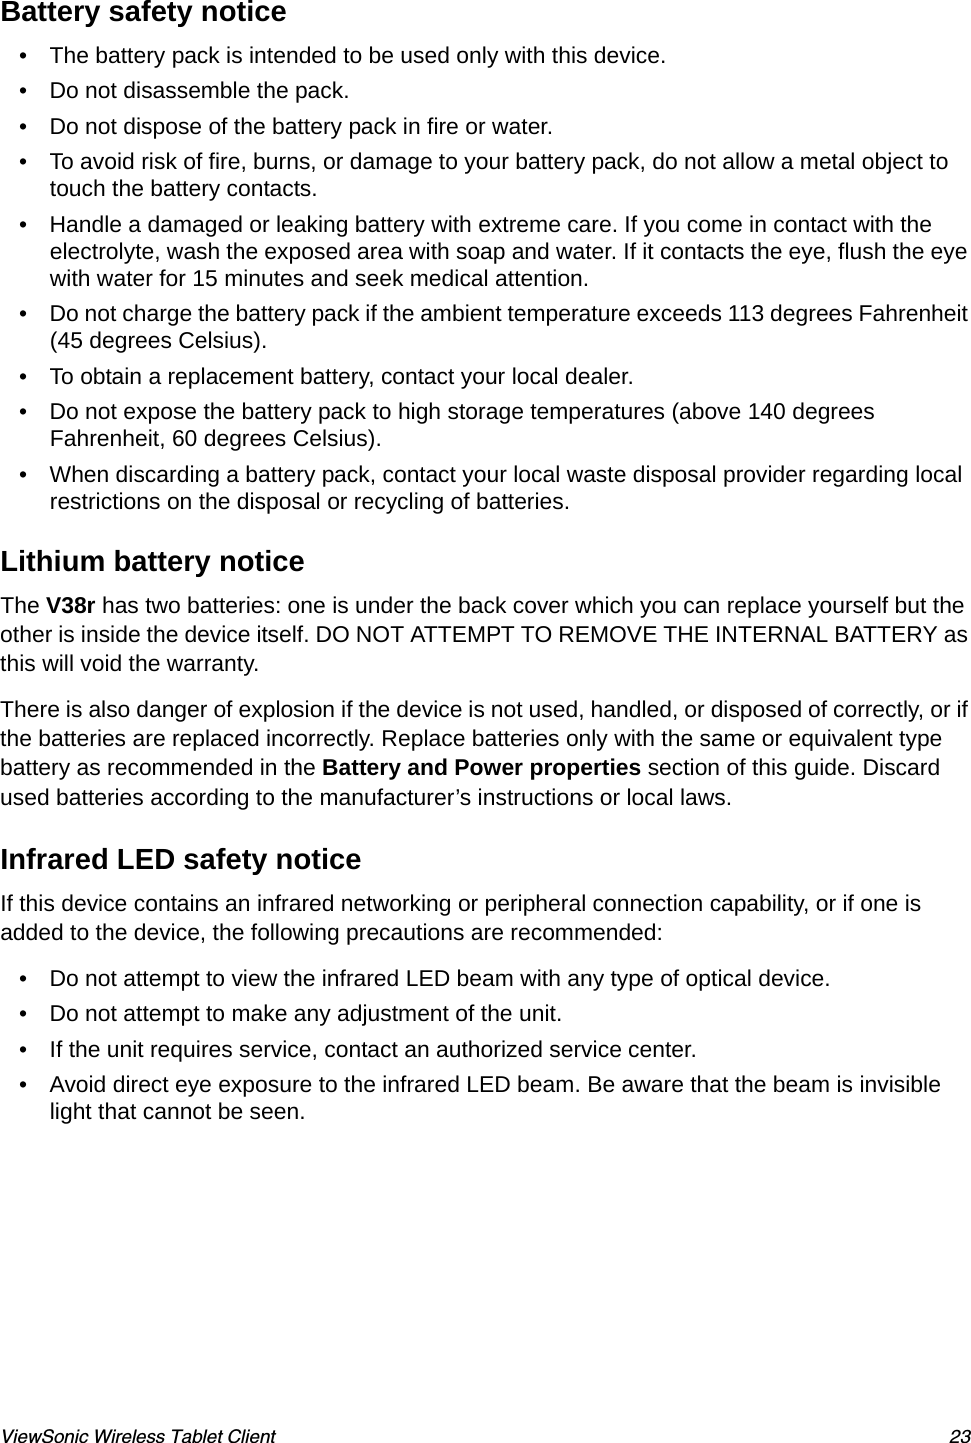 ViewSonic Wireless Tablet Client 23Battery safety notice• The battery pack is intended to be used only with this device.• Do not disassemble the pack.• Do not dispose of the battery pack in fire or water.• To avoid risk of fire, burns, or damage to your battery pack, do not allow a metal object to touch the battery contacts.• Handle a damaged or leaking battery with extreme care. If you come in contact with the electrolyte, wash the exposed area with soap and water. If it contacts the eye, flush the eye with water for 15 minutes and seek medical attention.• Do not charge the battery pack if the ambient temperature exceeds 113 degrees Fahrenheit (45 degrees Celsius).• To obtain a replacement battery, contact your local dealer.• Do not expose the battery pack to high storage temperatures (above 140 degrees Fahrenheit, 60 degrees Celsius).• When discarding a battery pack, contact your local waste disposal provider regarding local restrictions on the disposal or recycling of batteries.Lithium battery noticeThe V38r has two batteries: one is under the back cover which you can replace yourself but the other is inside the device itself. DO NOT ATTEMPT TO REMOVE THE INTERNAL BATTERY as this will void the warranty.There is also danger of explosion if the device is not used, handled, or disposed of correctly, or if the batteries are replaced incorrectly. Replace batteries only with the same or equivalent type battery as recommended in the Battery and Power properties section of this guide. Discard used batteries according to the manufacturer’s instructions or local laws.Infrared LED safety noticeIf this device contains an infrared networking or peripheral connection capability, or if one is added to the device, the following precautions are recommended:• Do not attempt to view the infrared LED beam with any type of optical device.• Do not attempt to make any adjustment of the unit.• If the unit requires service, contact an authorized service center.• Avoid direct eye exposure to the infrared LED beam. Be aware that the beam is invisible light that cannot be seen.